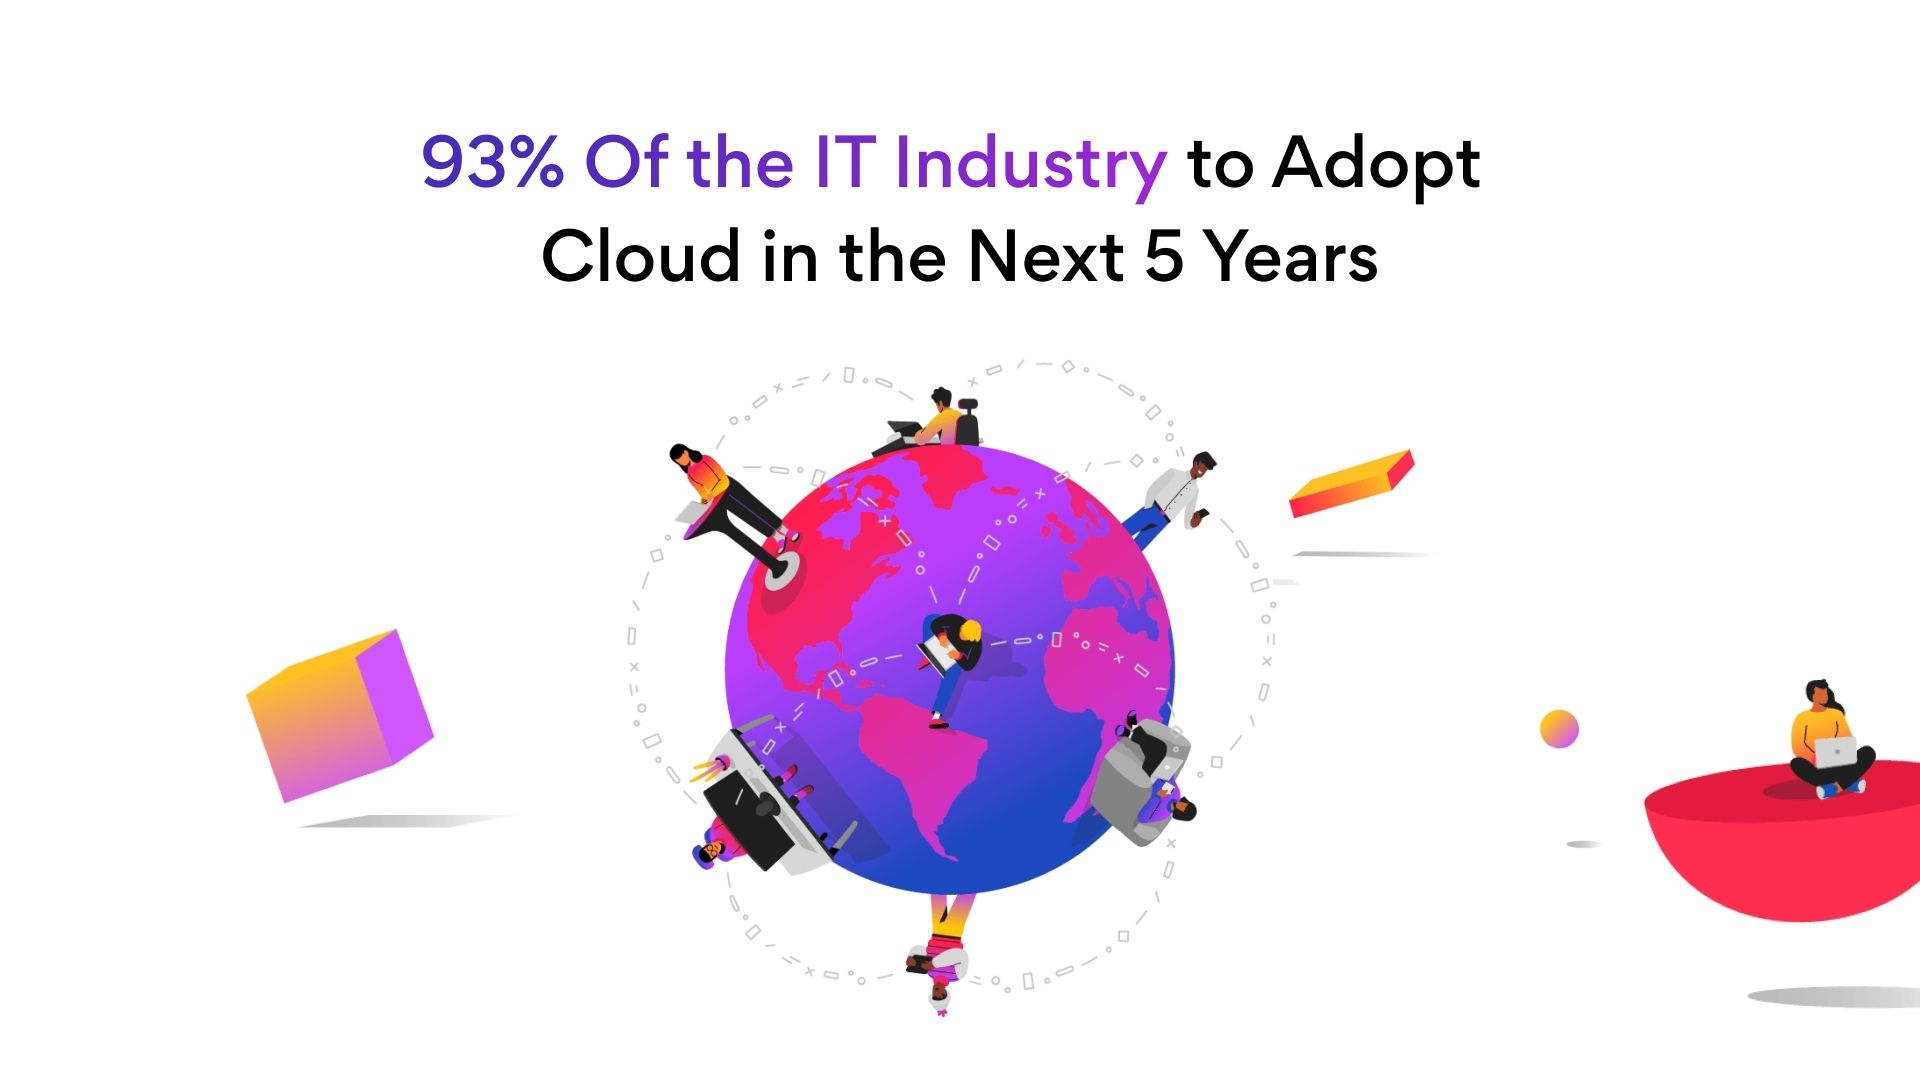 Cloud tech adoption in next 5 years